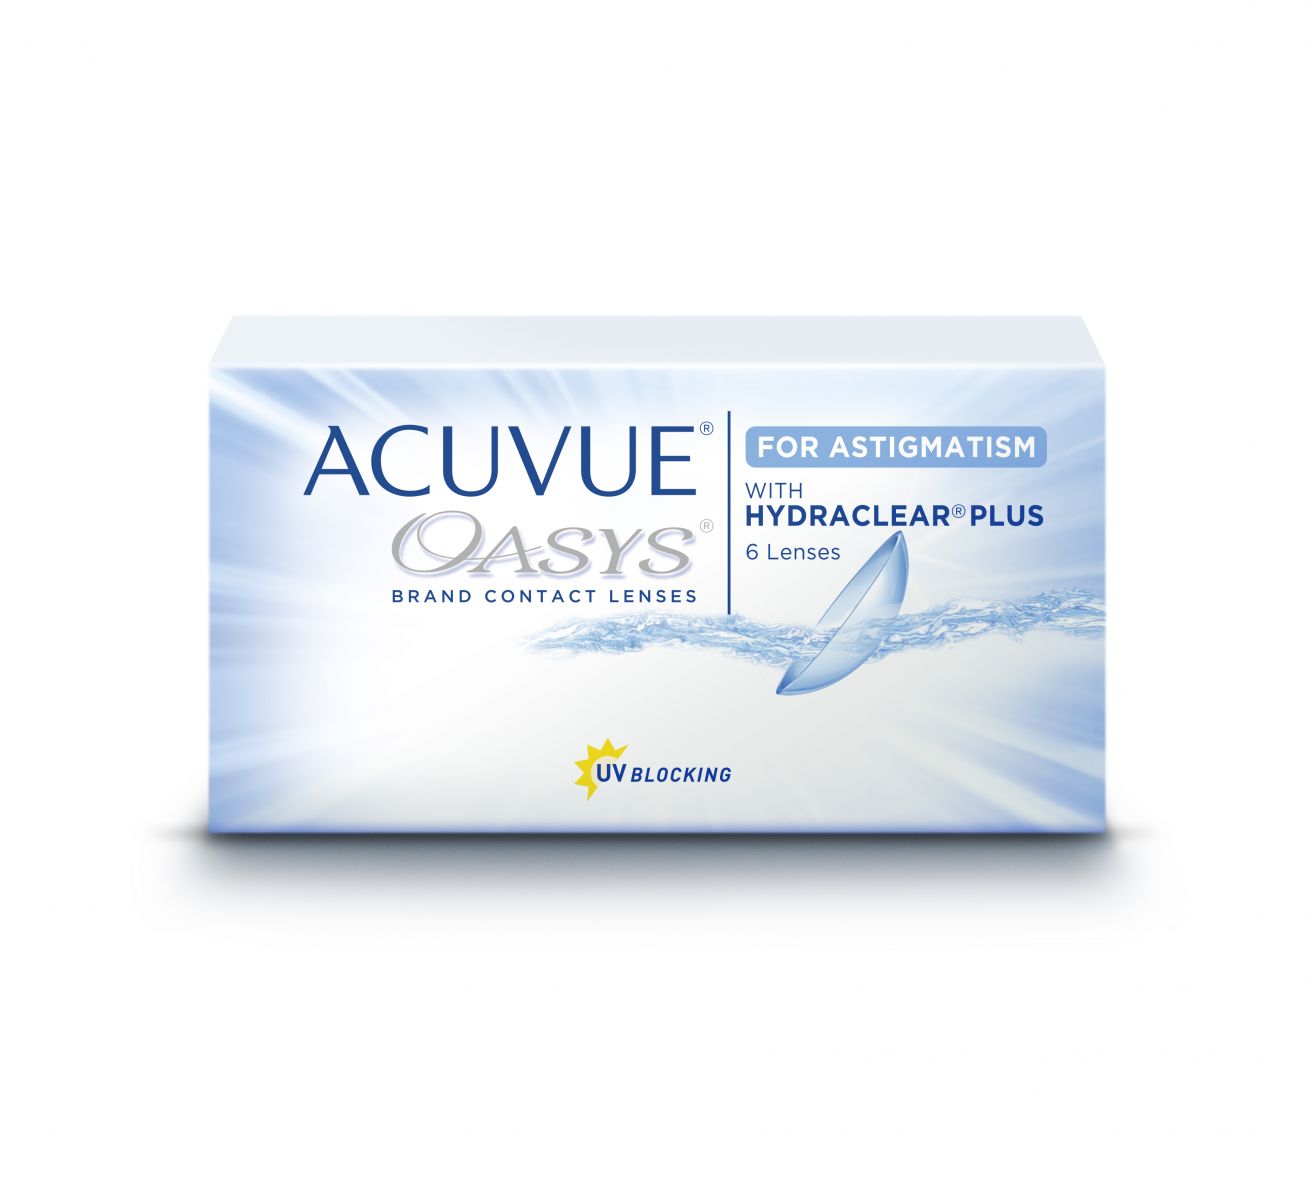 ACUVUE® OASYS® for ASTIGMATISM